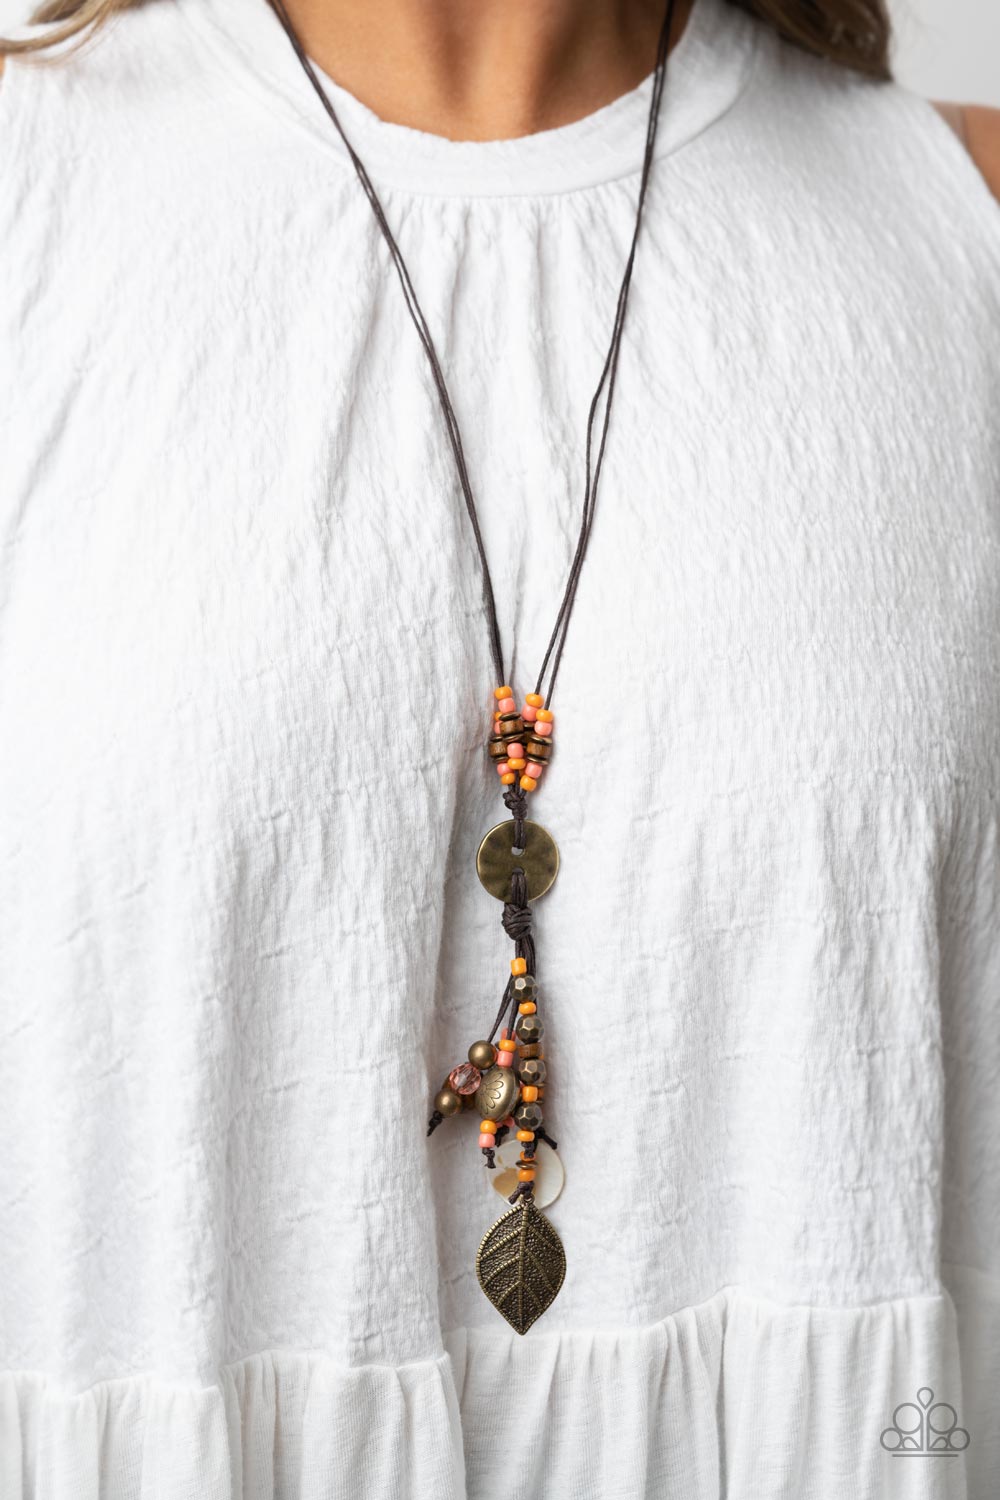 Knotted Keepsake Orange Necklace - Paparazzi Accessories  An earthy assortment of orange and coral seed beads, rustic brass discs, and wooden accents glide along lengthy strands of brown cording that knot around a hammered brass disc. Tassels of matching beads, a white shell-like accent, floral silver bead, and brass leaf charm dance from the bottom, adding playful movement to the free-spirited display. Features an adjustable clasp closure. Includes one pair of matching earrings.